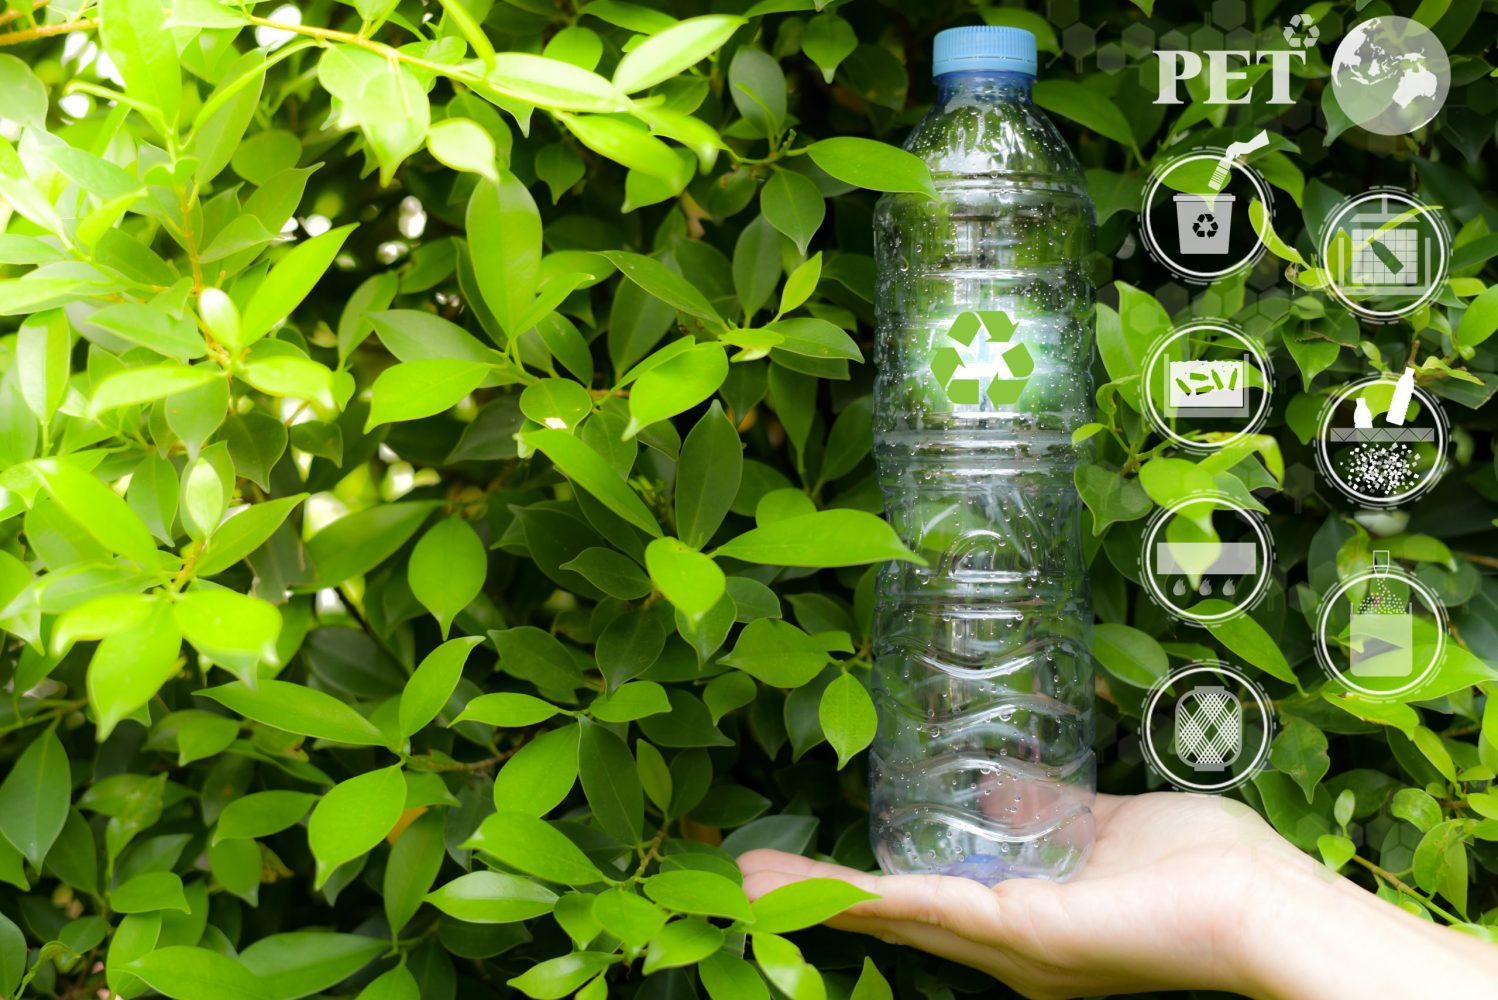 Reliance announces doubling of PET bottles recycling capacity